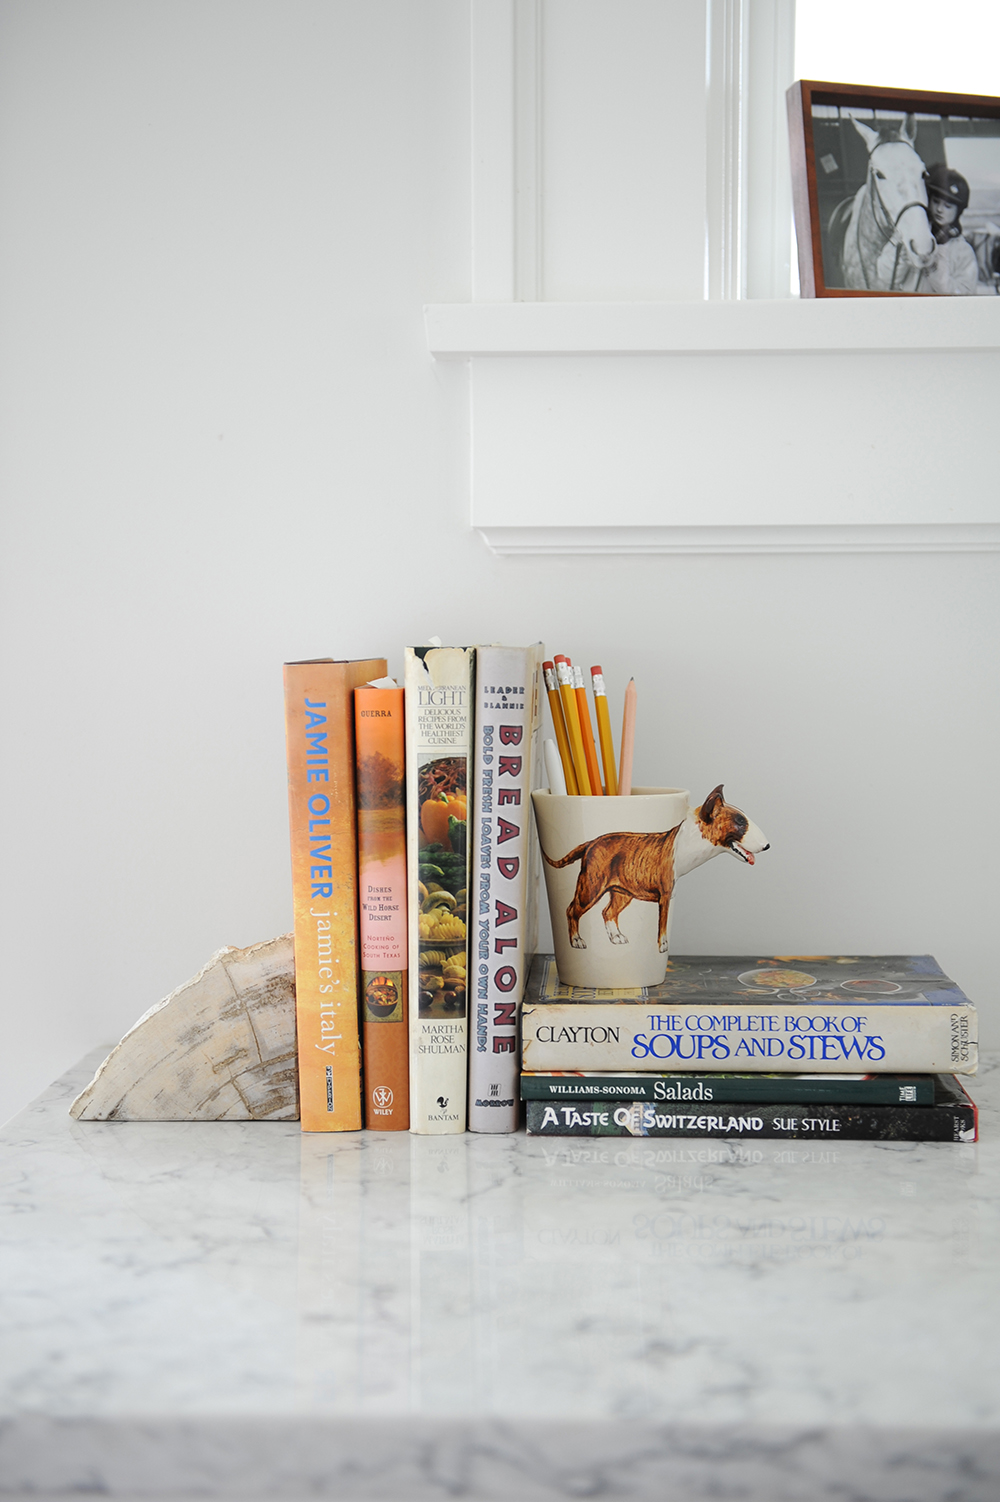 A quirky kitchen vignette featuring old cookbooks.